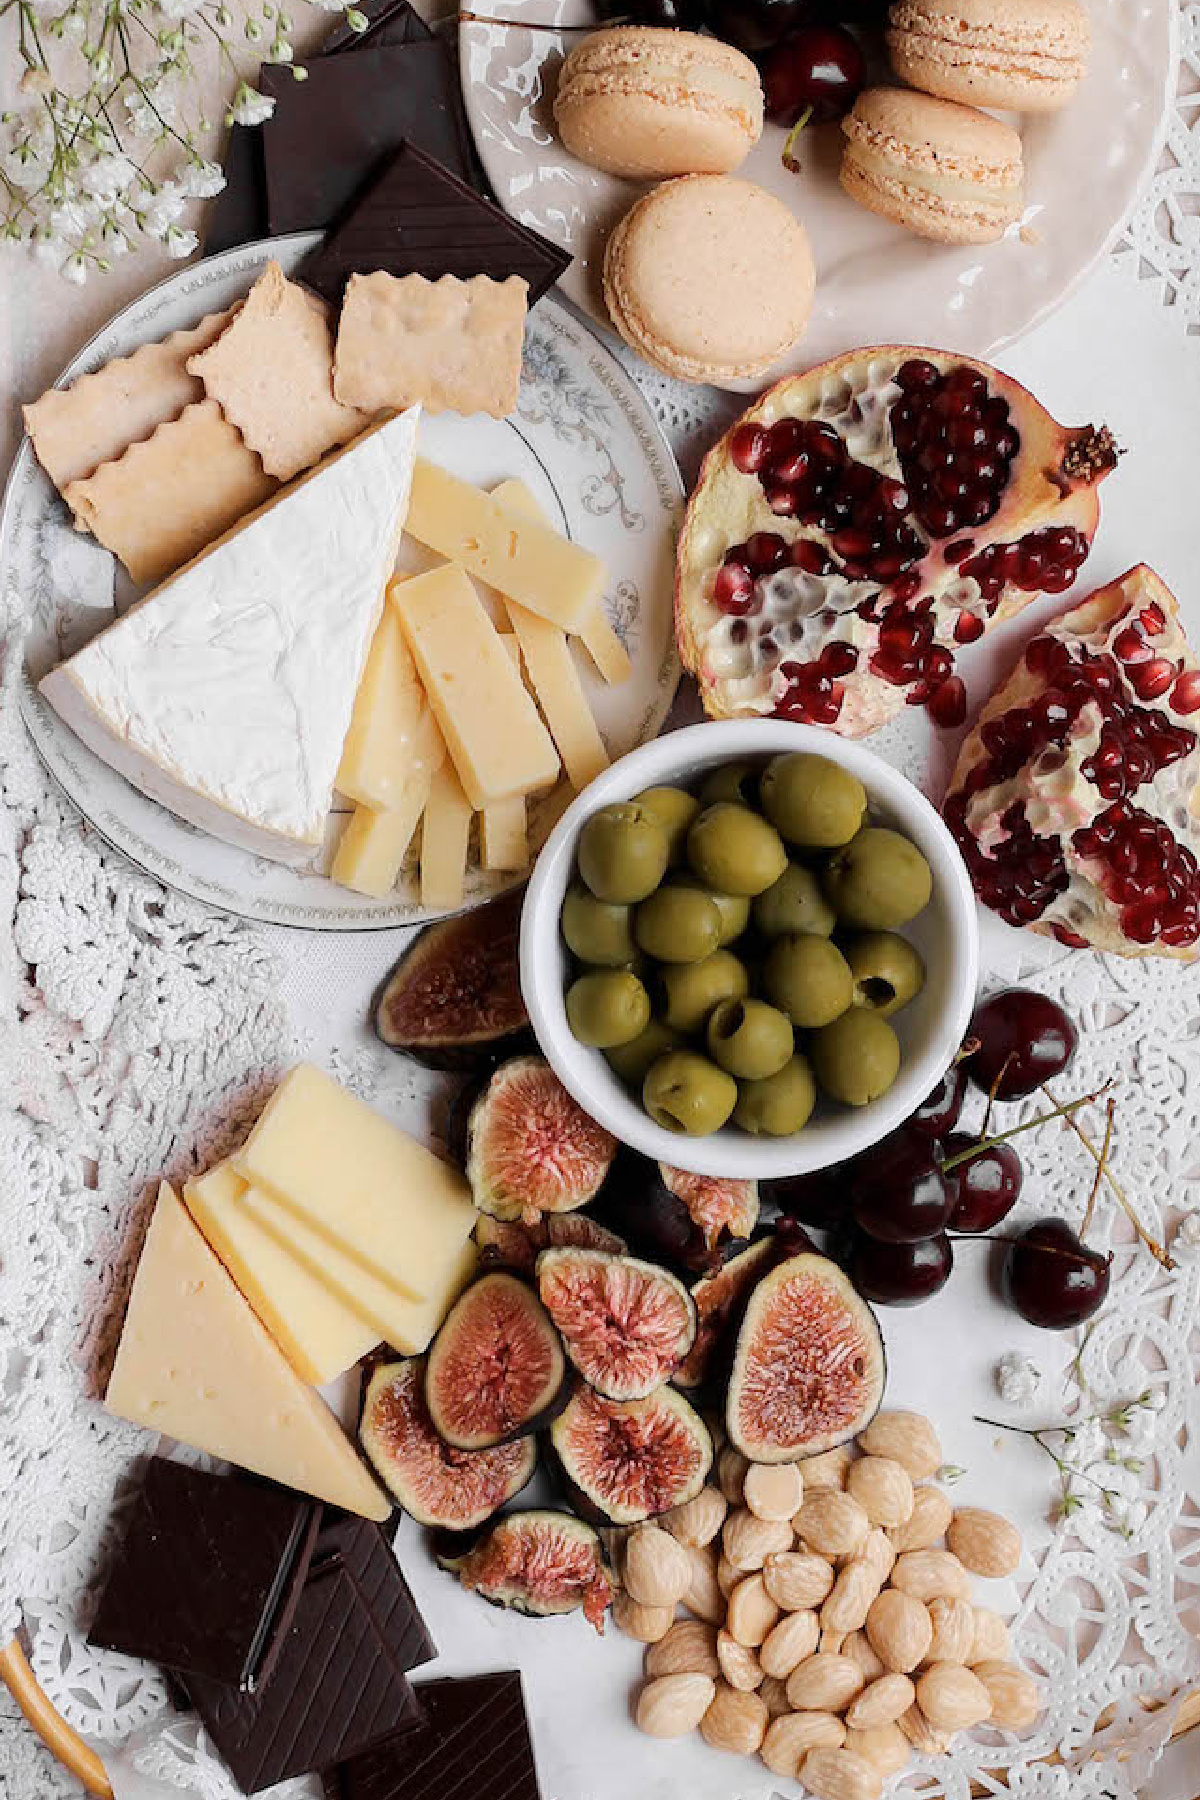 Cheap Party Foods - Cheese Board with Crackers